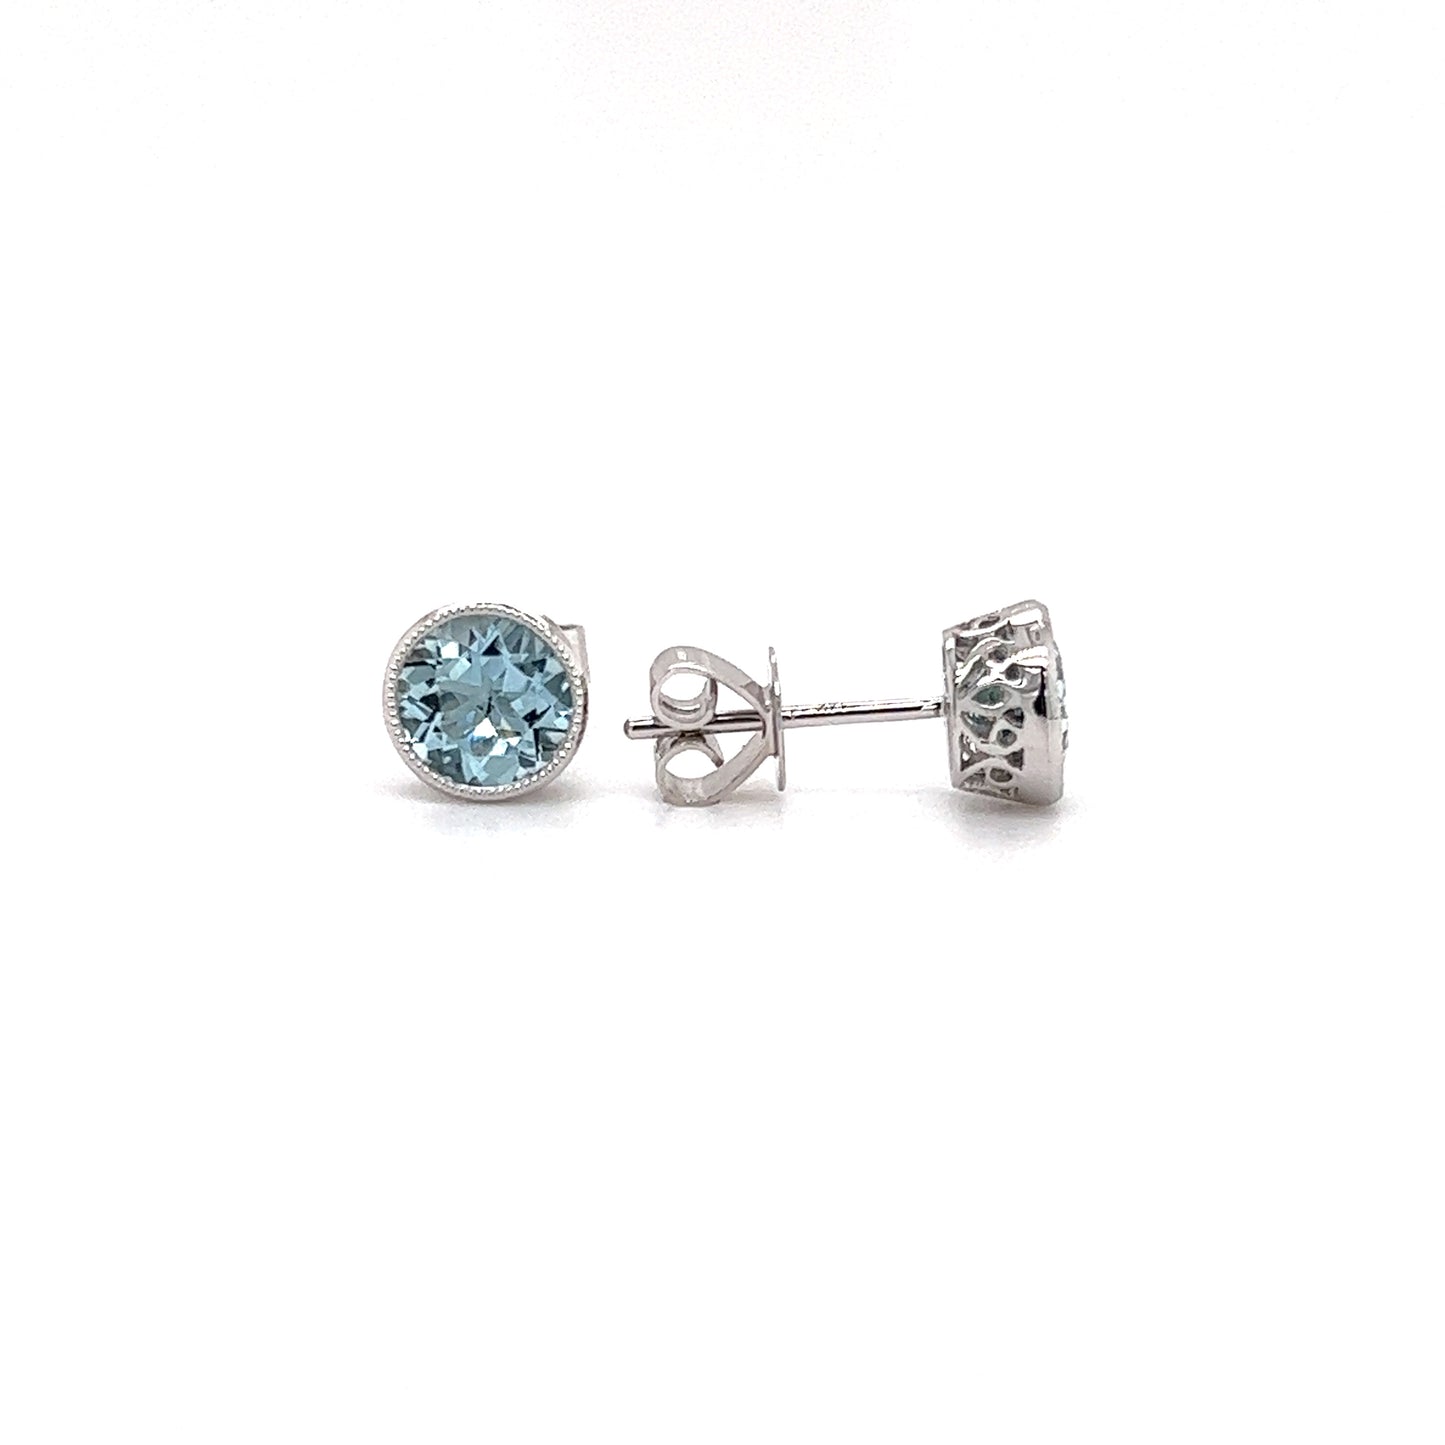 Aquamarine Stud Earrings with Filigree and Milgrain Details in 14K White Gold Front and Side View